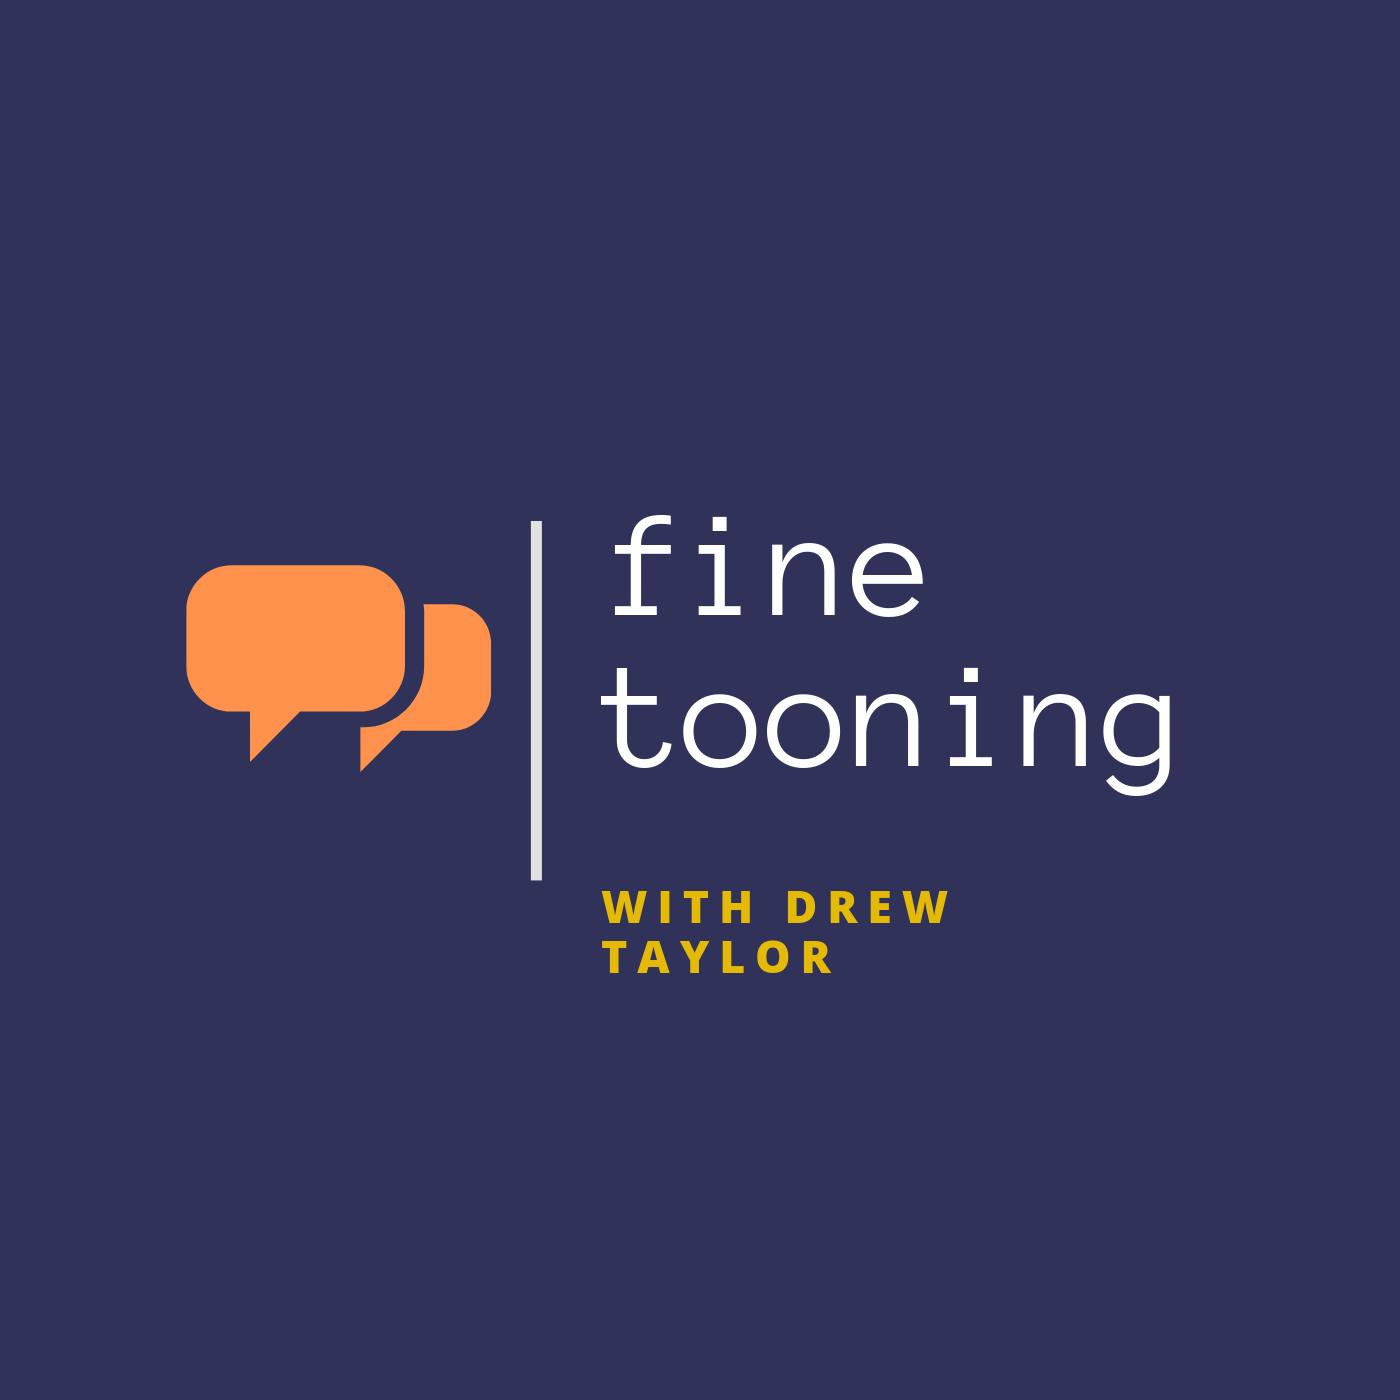 Fine Tooning with Drew Taylor - Episode 187: How DWA’s “Kung Fu Panda” became a full-fledged franchise